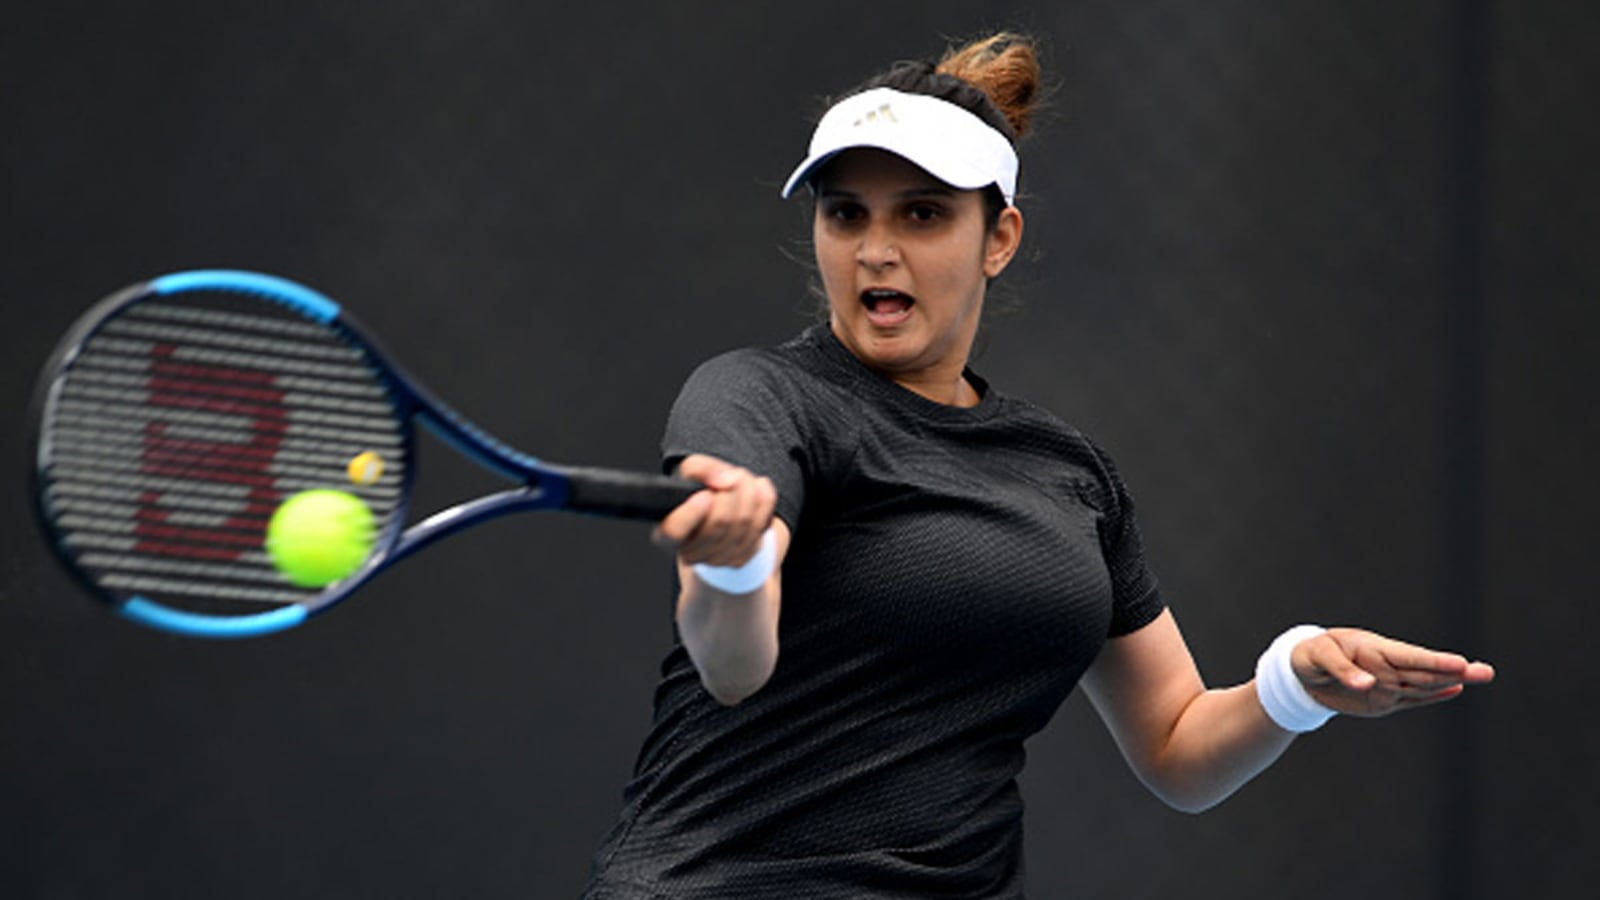 Saniya Mirza Xxx Videos - For Sania Mirza, belief to take on the best is what matters most | Tennis  News - Hindustan Times